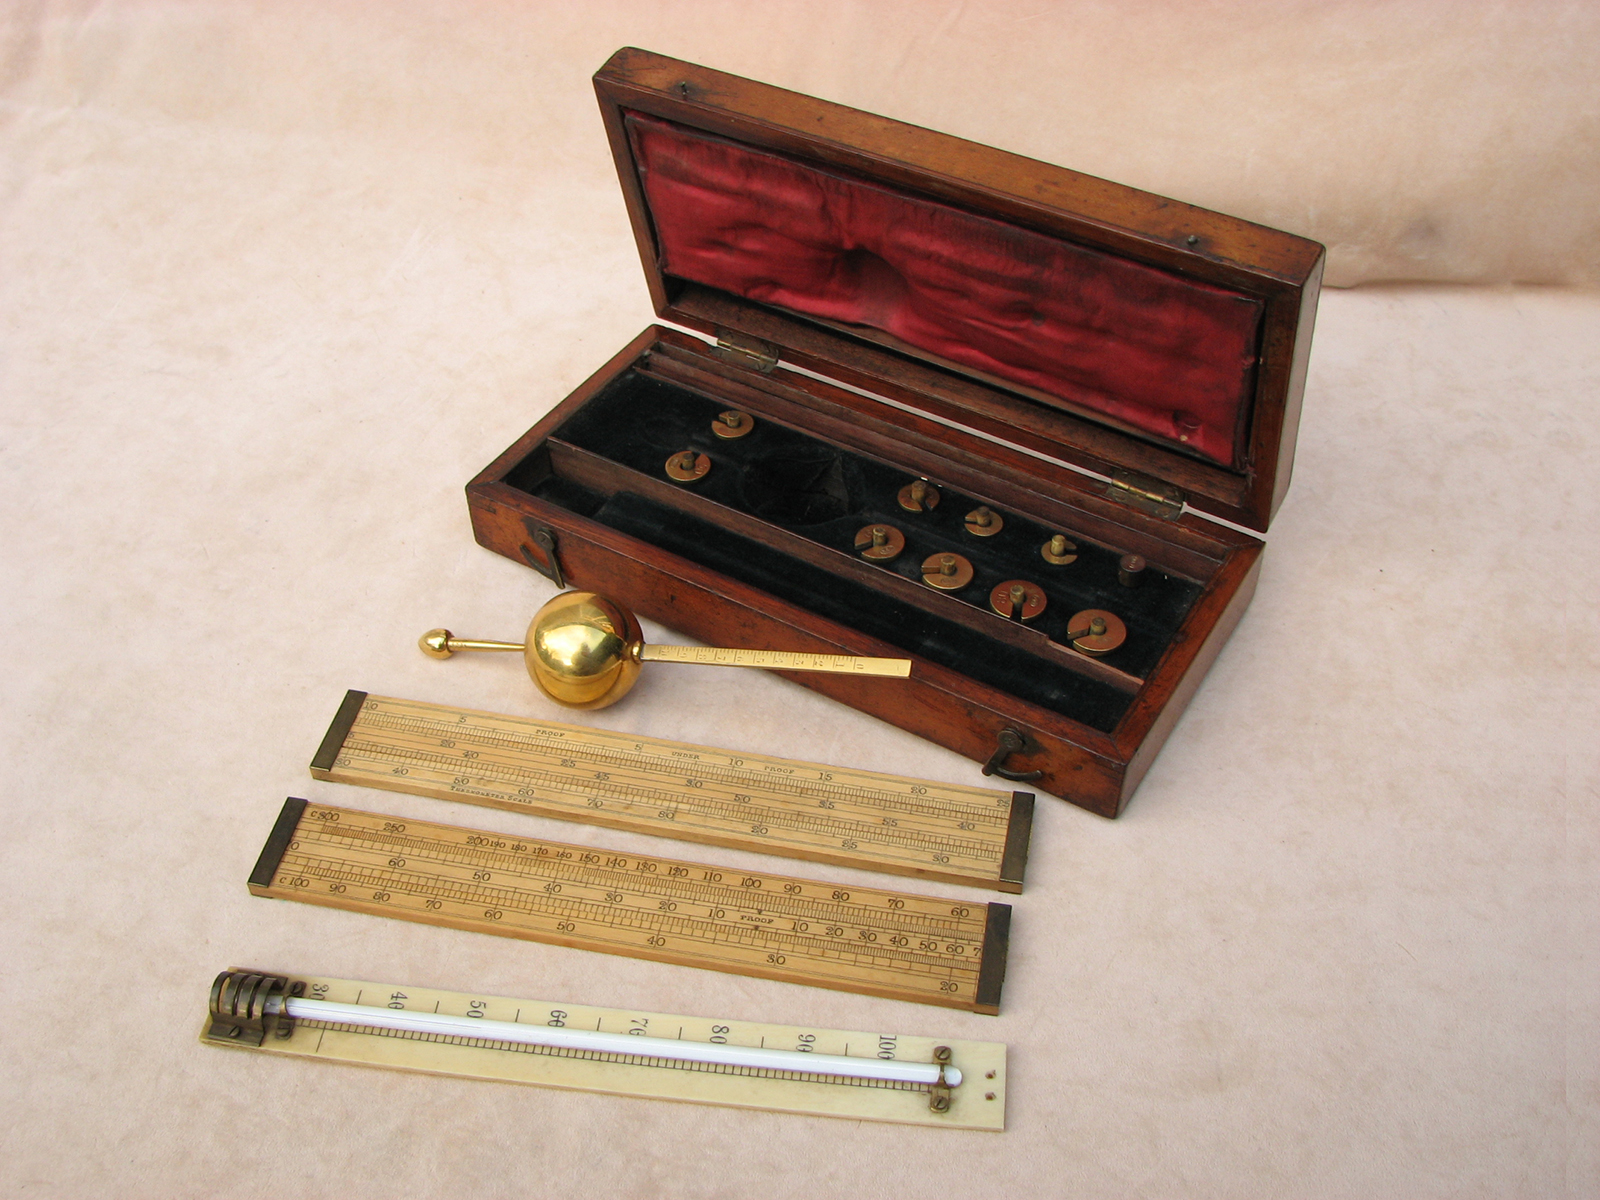 Antique Negretti & Zambra Sikes hydrometer set with proof rules